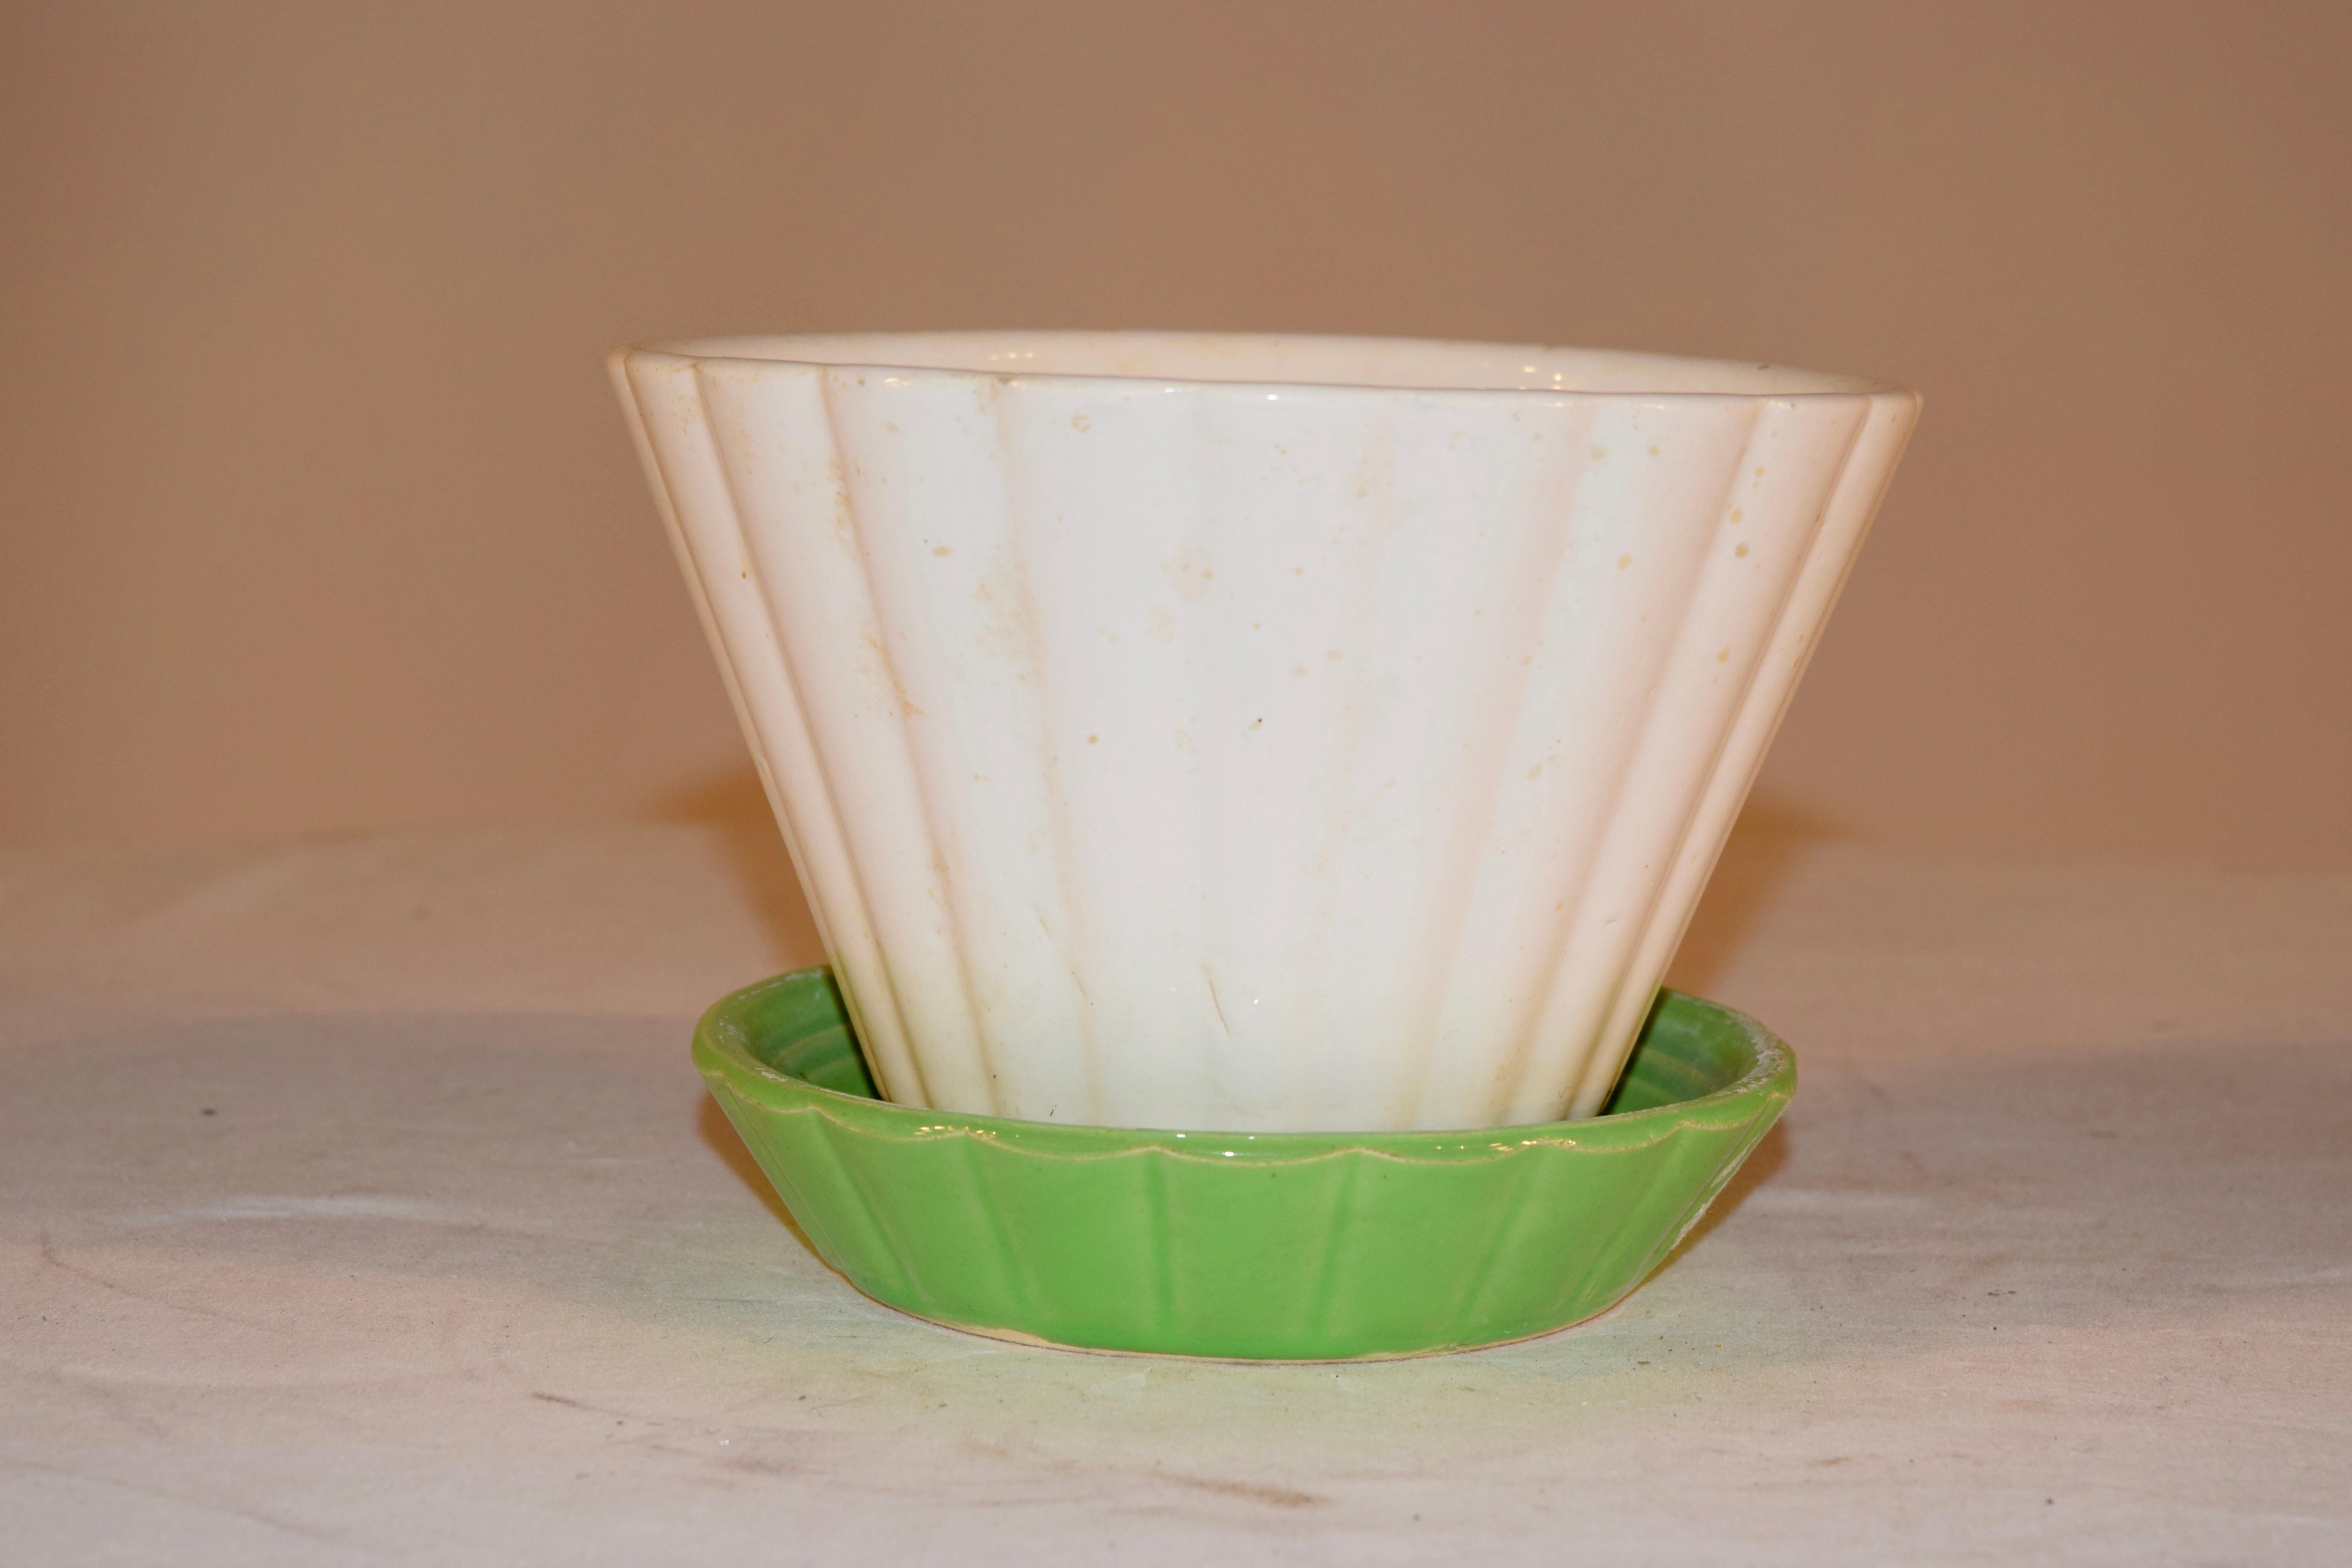 Vintage Shawnee pottery with attached saucer. Ribbed white planter has attached green saucer - known as 